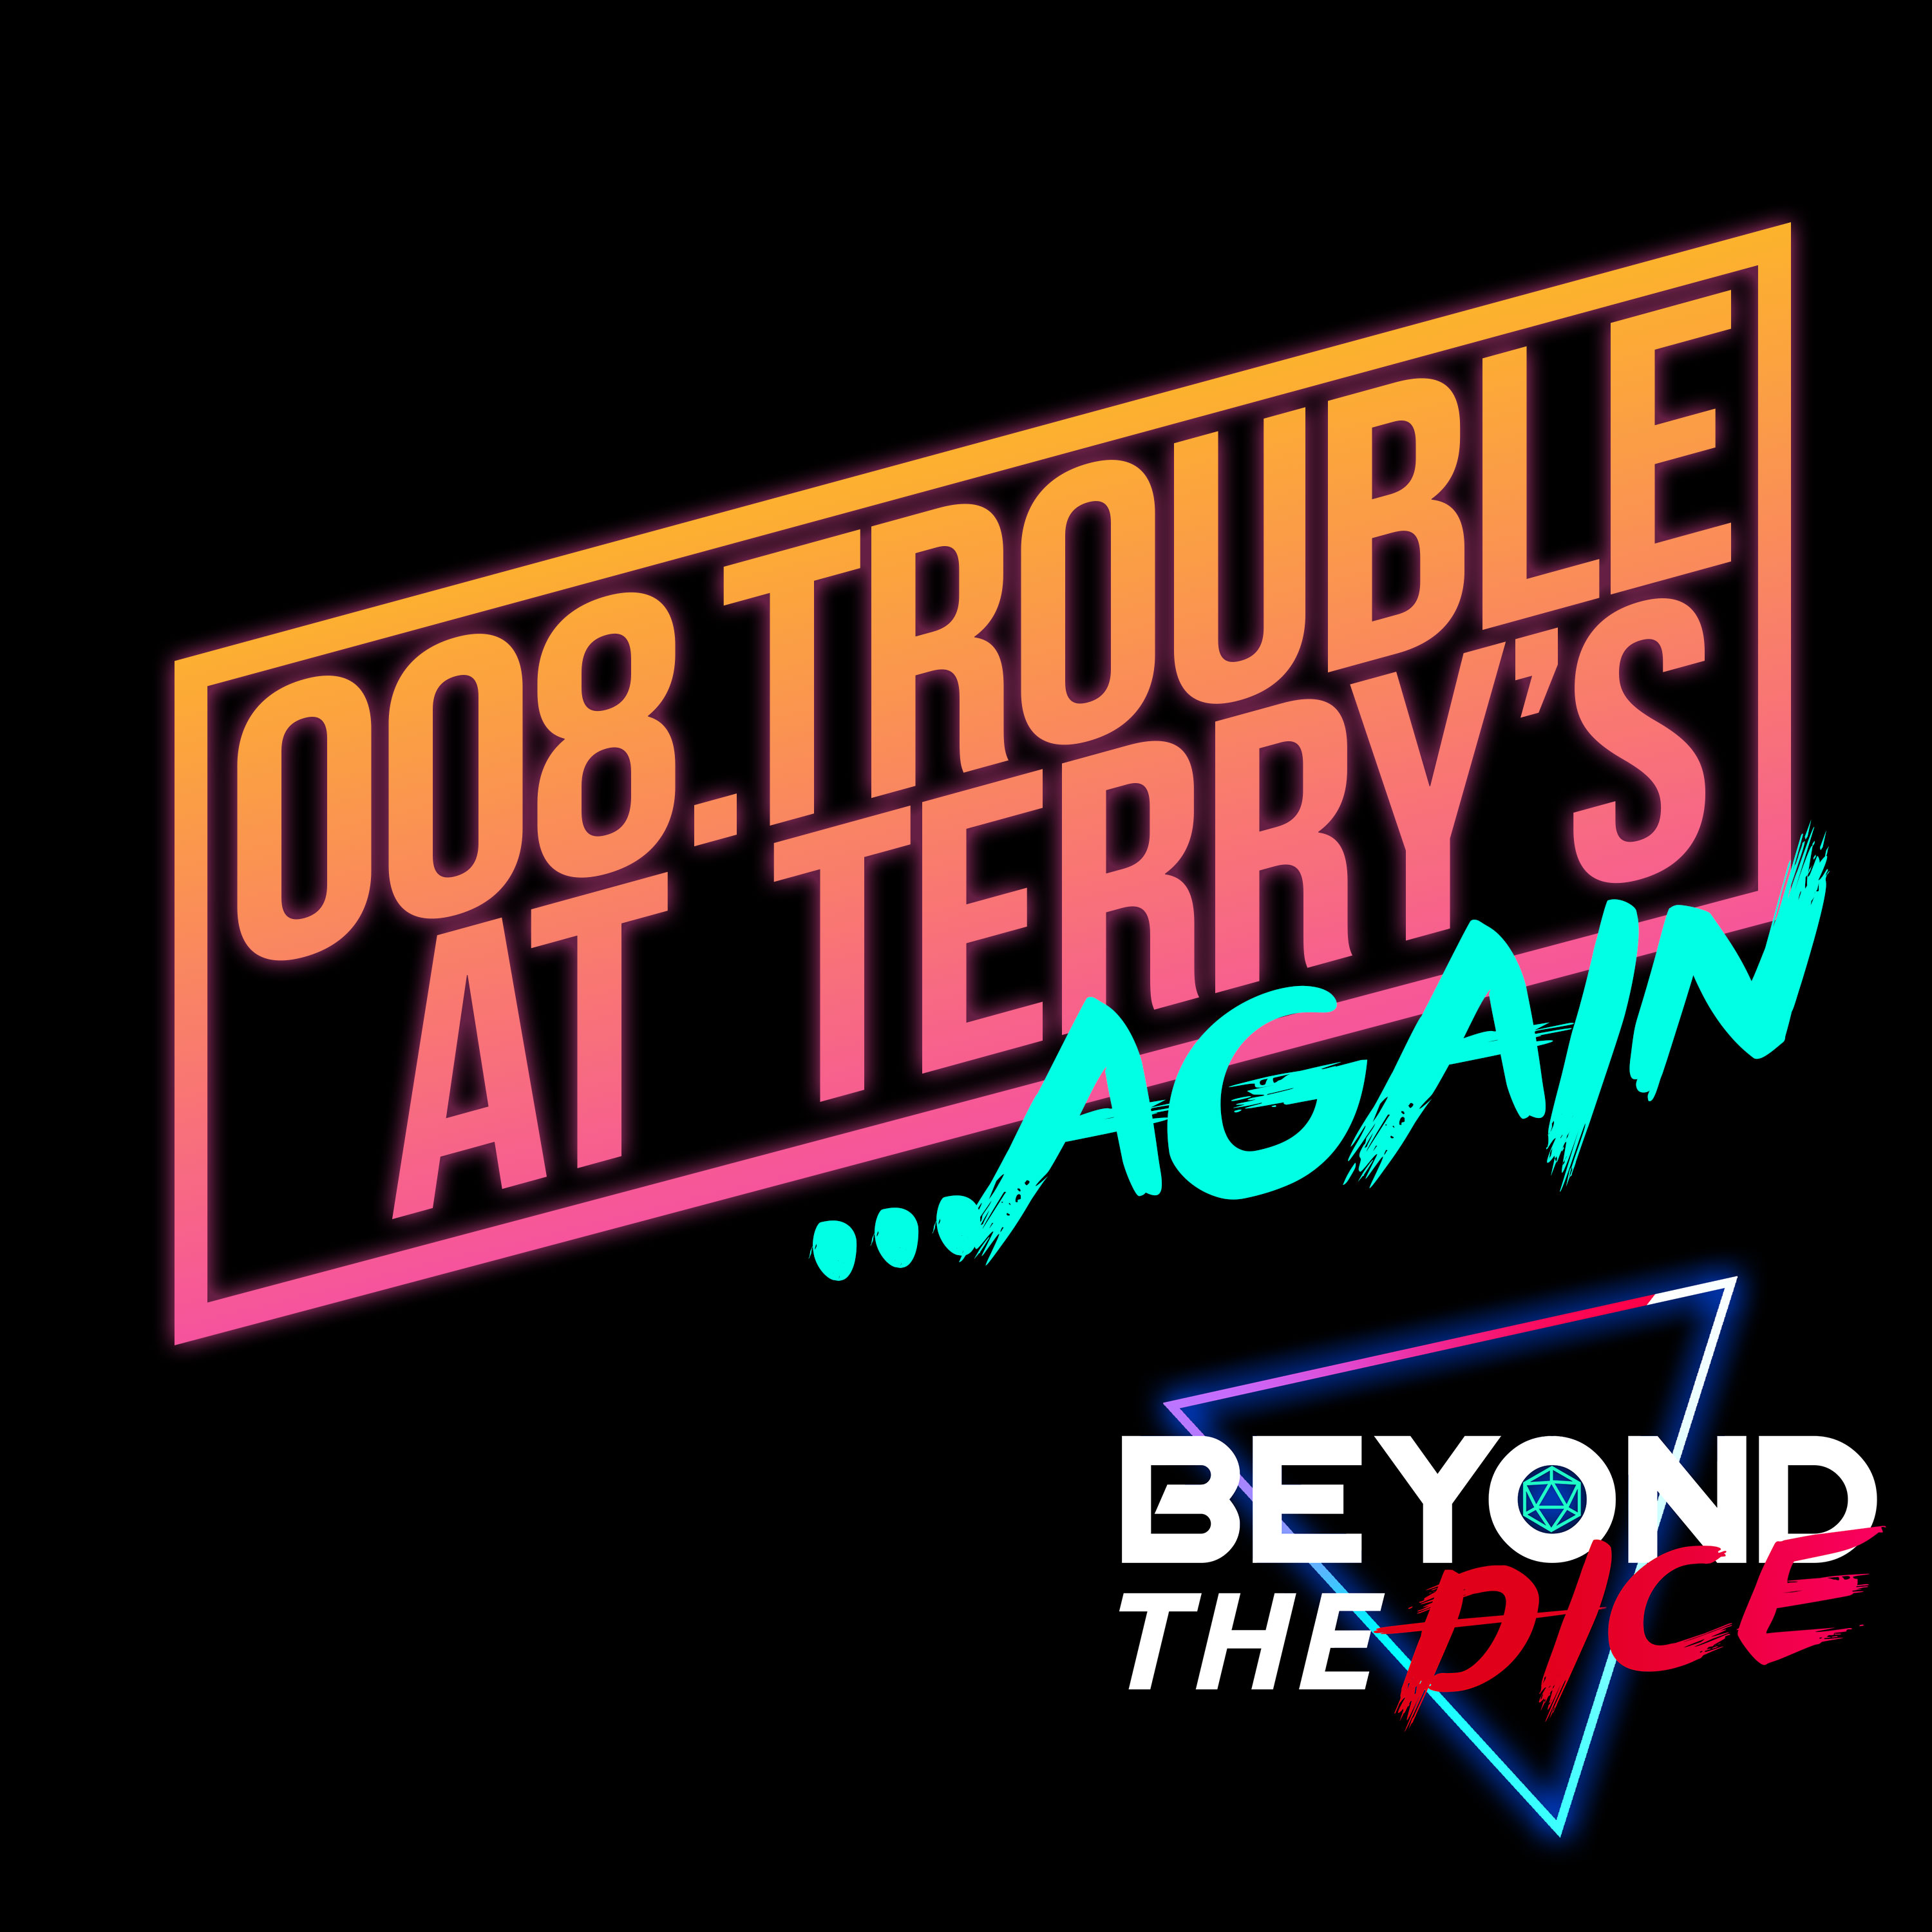 008.Trouble At Terry's...again